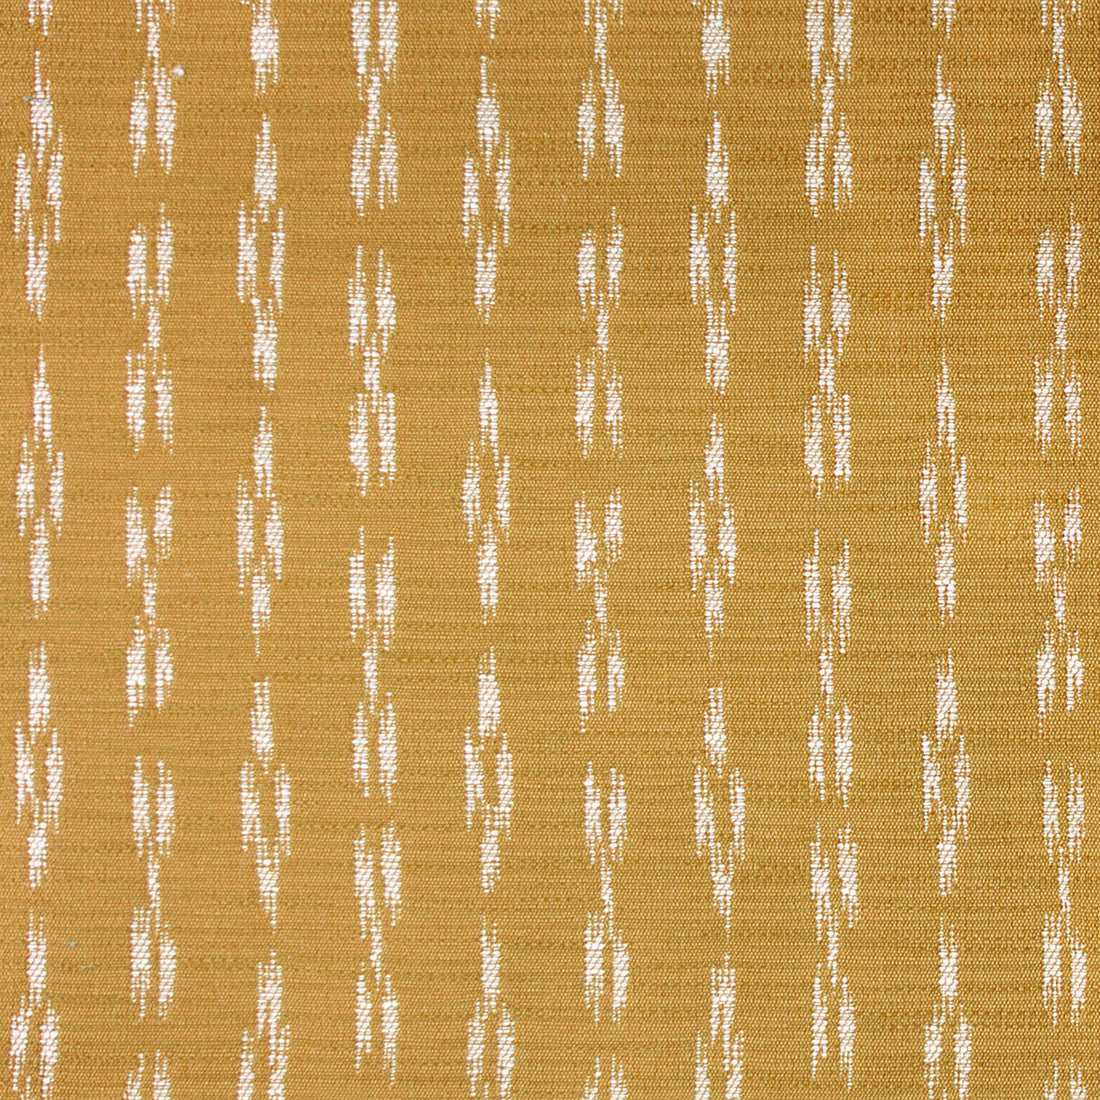 Yoko fabric in oro color - pattern GDT5647.002.0 - by Gaston y Daniela in the Gaston Japon collection